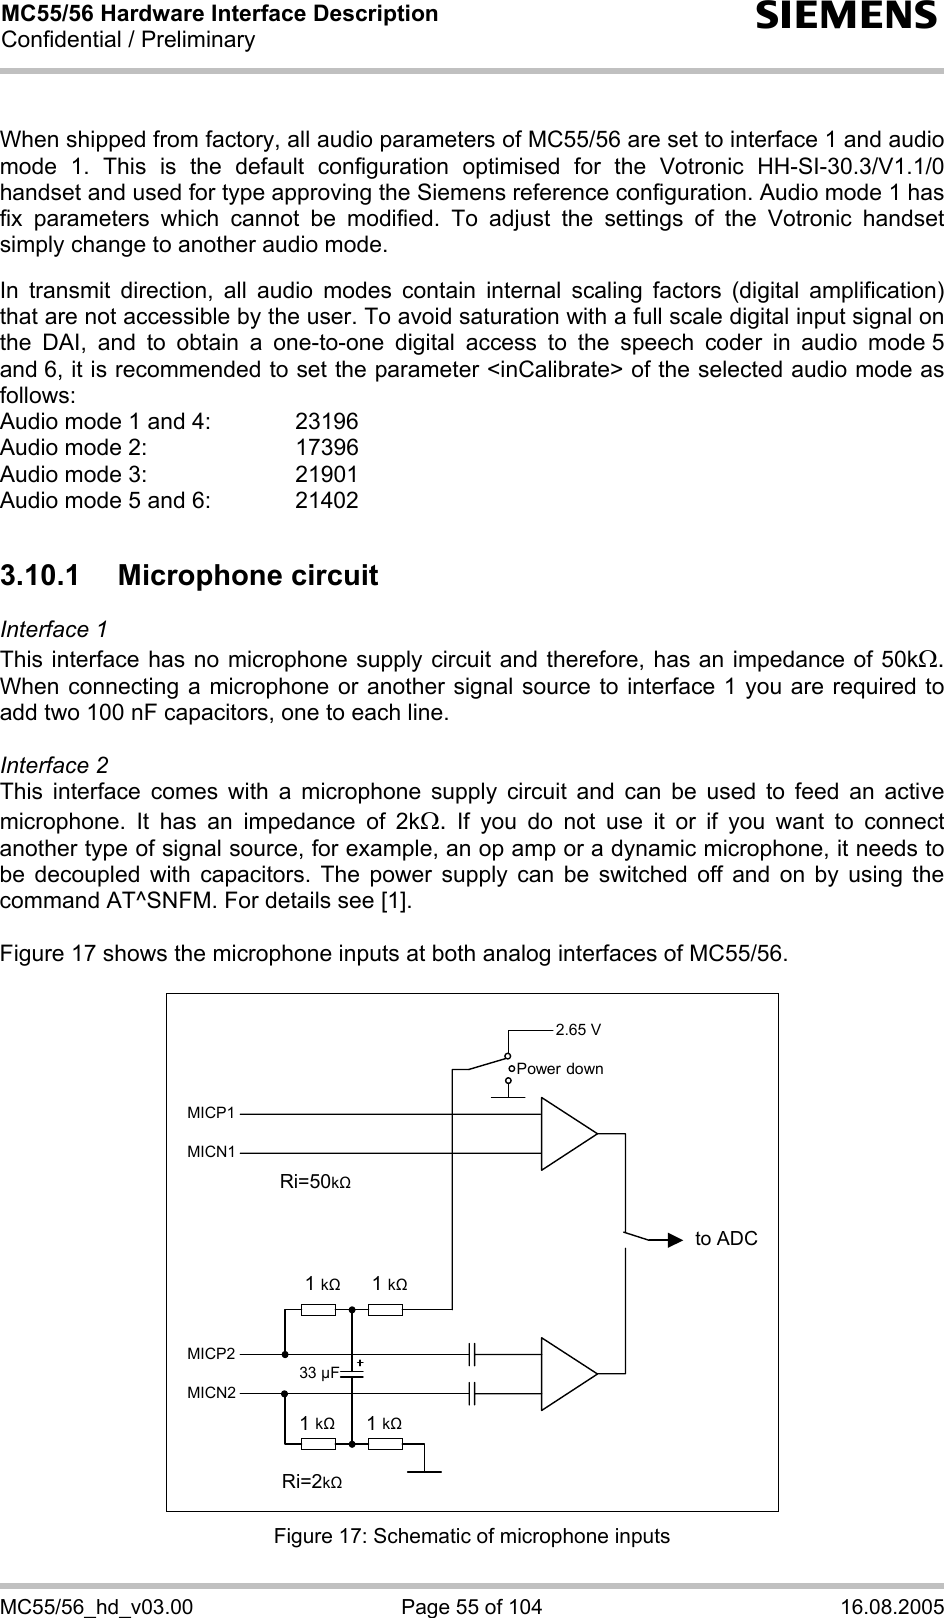 MC55/56 Hardware Interface Description Confidential / Preliminary s MC55/56_hd_v03.00  Page 55 of 104  16.08.2005  When shipped from factory, all audio parameters of MC55/56 are set to interface 1 and audio mode 1. This is the default configuration optimised for the Votronic HH-SI-30.3/V1.1/0 handset and used for type approving the Siemens reference configuration. Audio mode 1 has fix parameters which cannot be modified. To adjust the settings of the Votronic handset simply change to another audio mode.  In transmit direction, all audio modes contain internal scaling factors (digital amplification) that are not accessible by the user. To avoid saturation with a full scale digital input signal on the DAI, and to obtain a one-to-one digital access to the speech coder in audio mode 5 and 6, it is recommended to set the parameter &lt;inCalibrate&gt; of the selected audio mode as follows: Audio mode 1 and 4:    23196 Audio mode 2:     17396 Audio mode 3:    21901 Audio mode 5 and 6:    21402  3.10.1 Microphone circuit Interface 1  This interface has no microphone supply circuit and therefore, has an impedance of 50kΩ. When connecting a microphone or another signal source to interface 1 you are required to add two 100 nF capacitors, one to each line.   Interface 2 This interface comes with a microphone supply circuit and can be used to feed an active microphone. It has an impedance of 2kΩ. If you do not use it or if you want to connect another type of signal source, for example, an op amp or a dynamic microphone, it needs to be decoupled with capacitors. The power supply can be switched off and on by using the command AT^SNFM. For details see [1].  Figure 17 shows the microphone inputs at both analog interfaces of MC55/56.    2.65 V to ADC Power downMICP1MICN1 MICP2MICN2 1 k   1 k1 k 1 k33 µF Ri=50k Ri=2k  Figure 17: Schematic of microphone inputs 